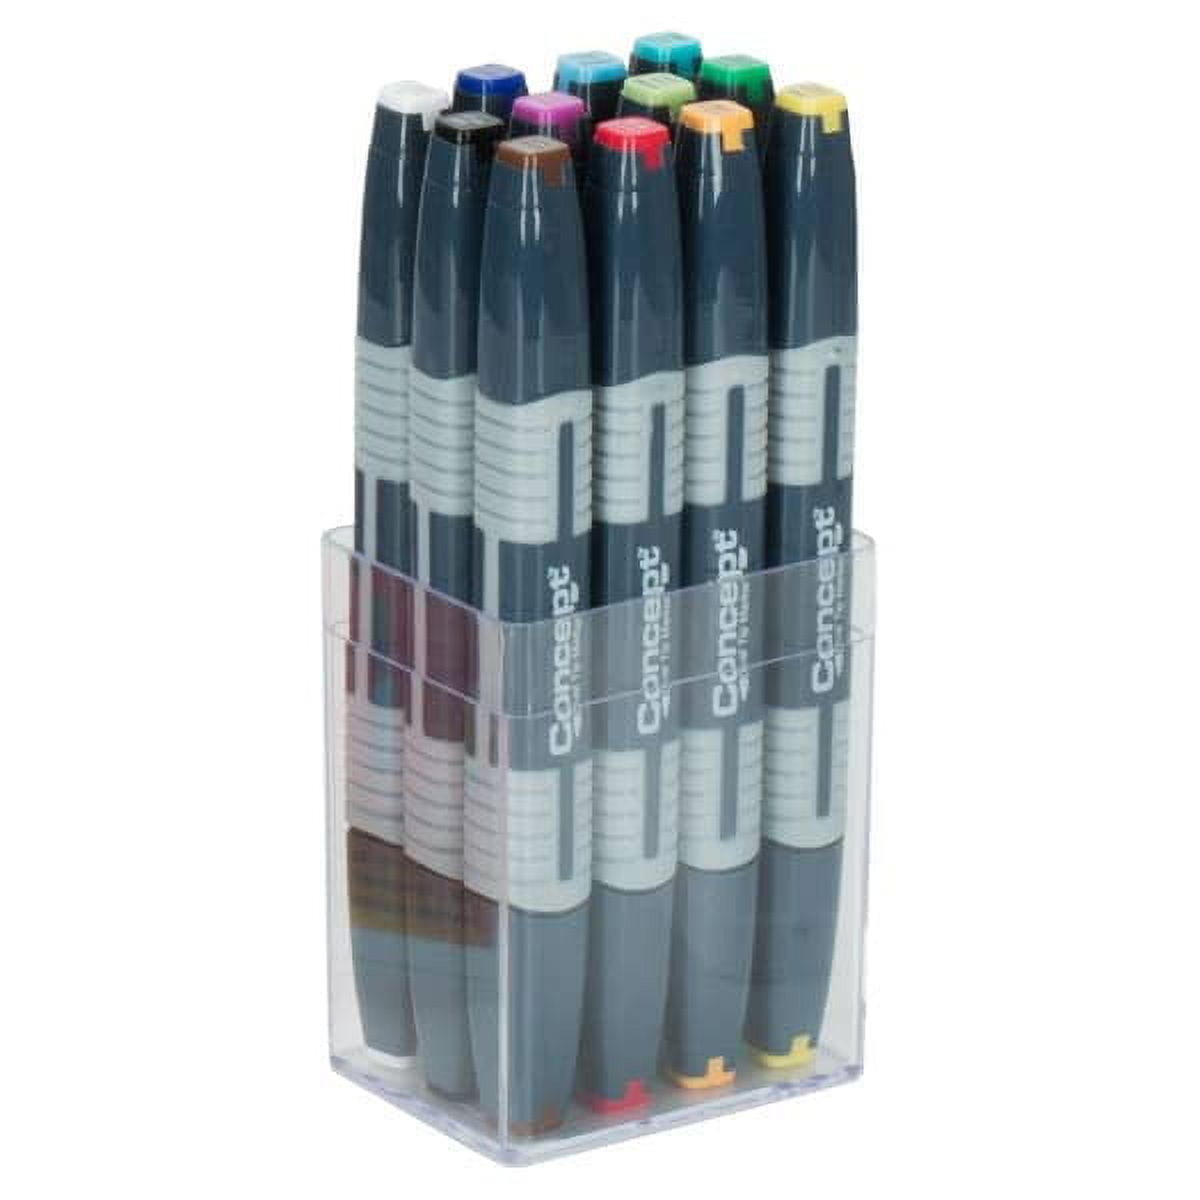 Set of 24 Fine Line Markers ($15) — Let’s Art About It